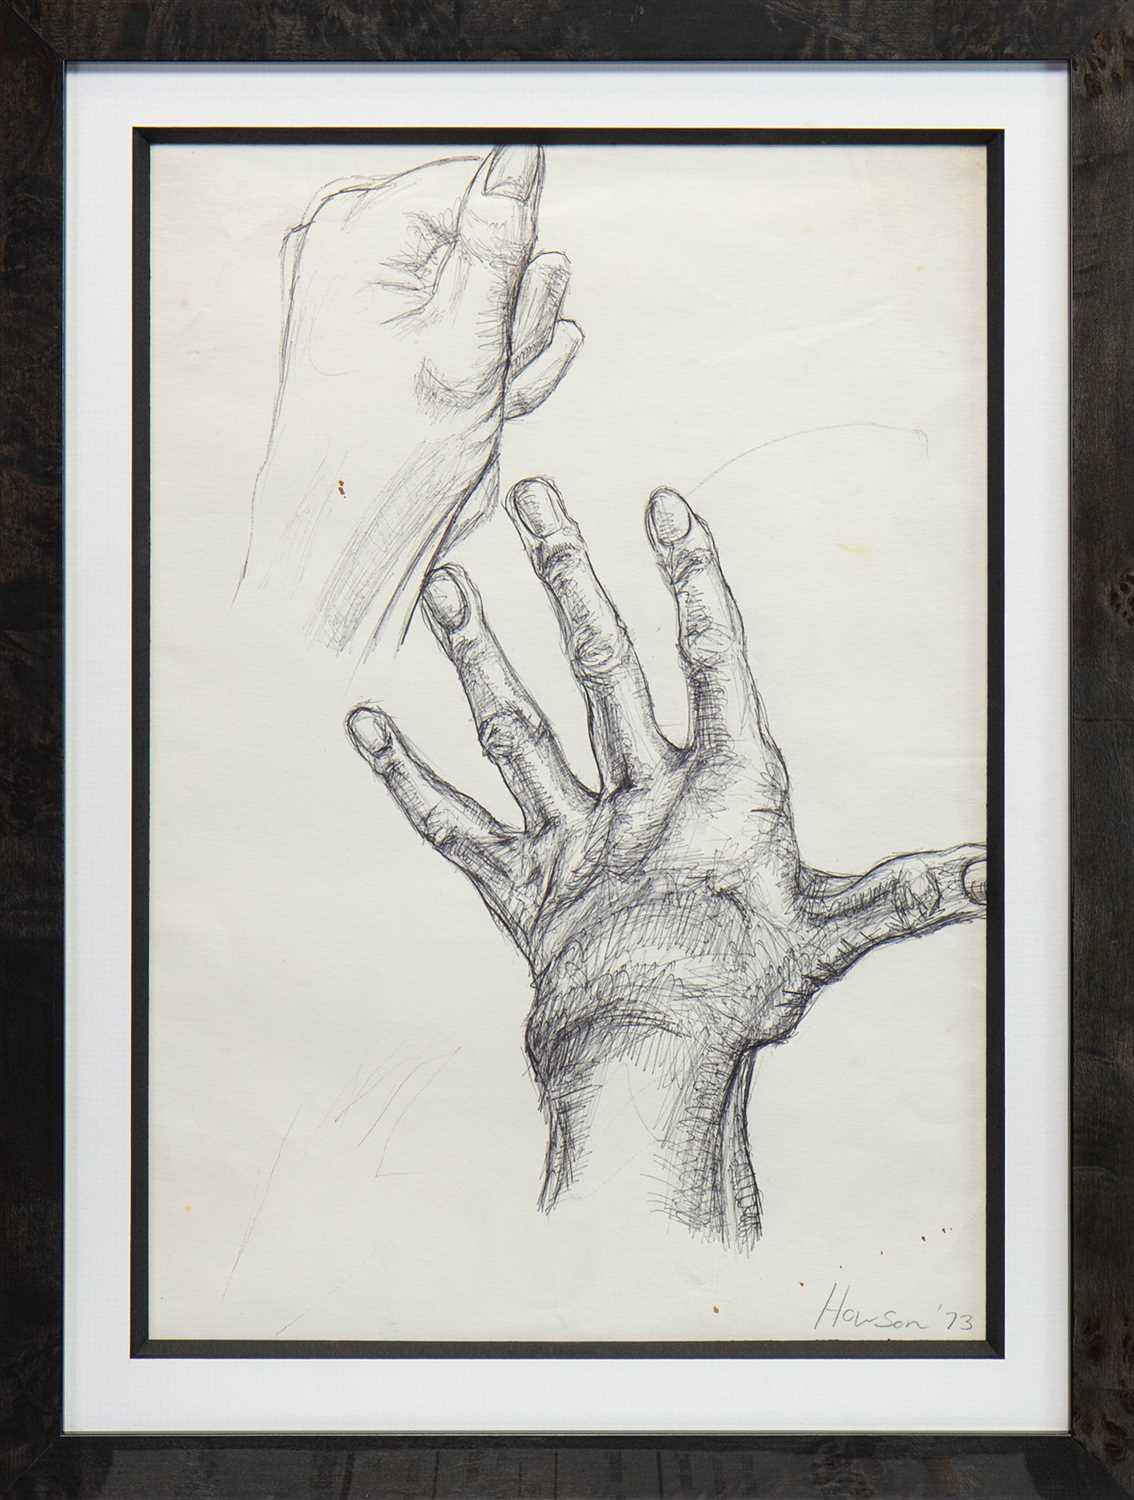 Lot 162 - AN EARLY STUDY OF HANDS IN PENCIL, BY PETER HOWSON